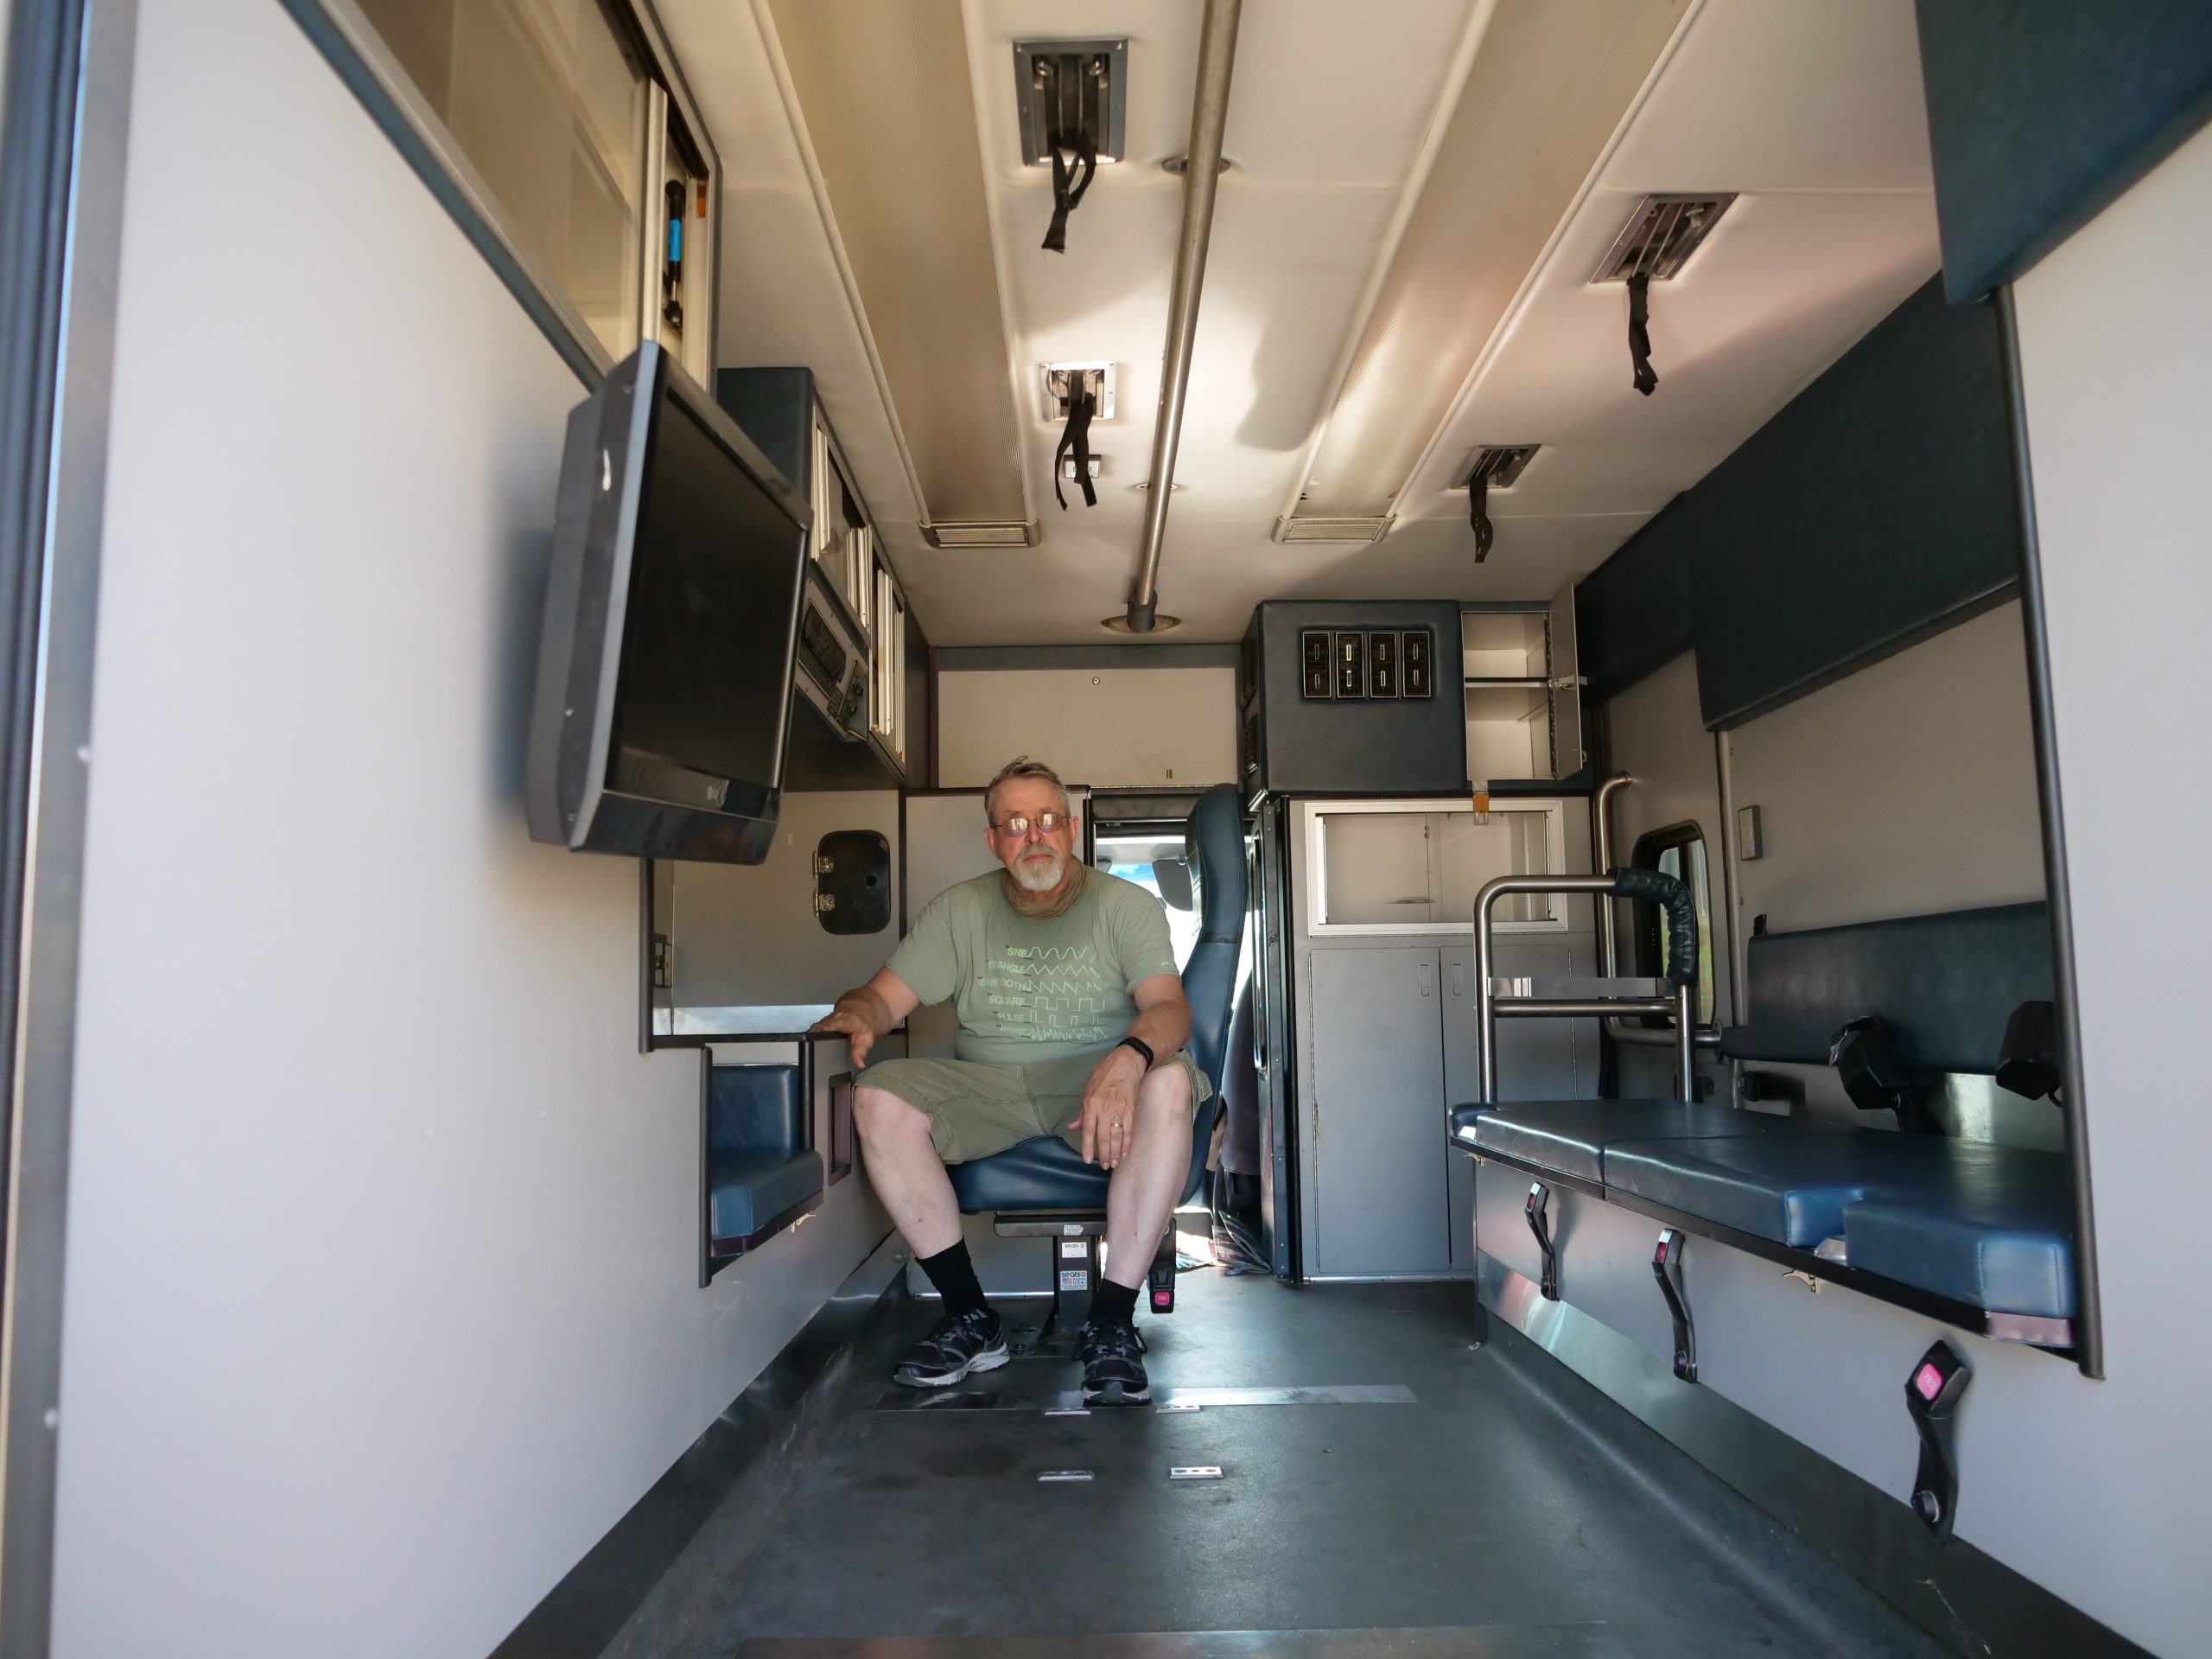 Ambulance Conversion To RV - The starting point